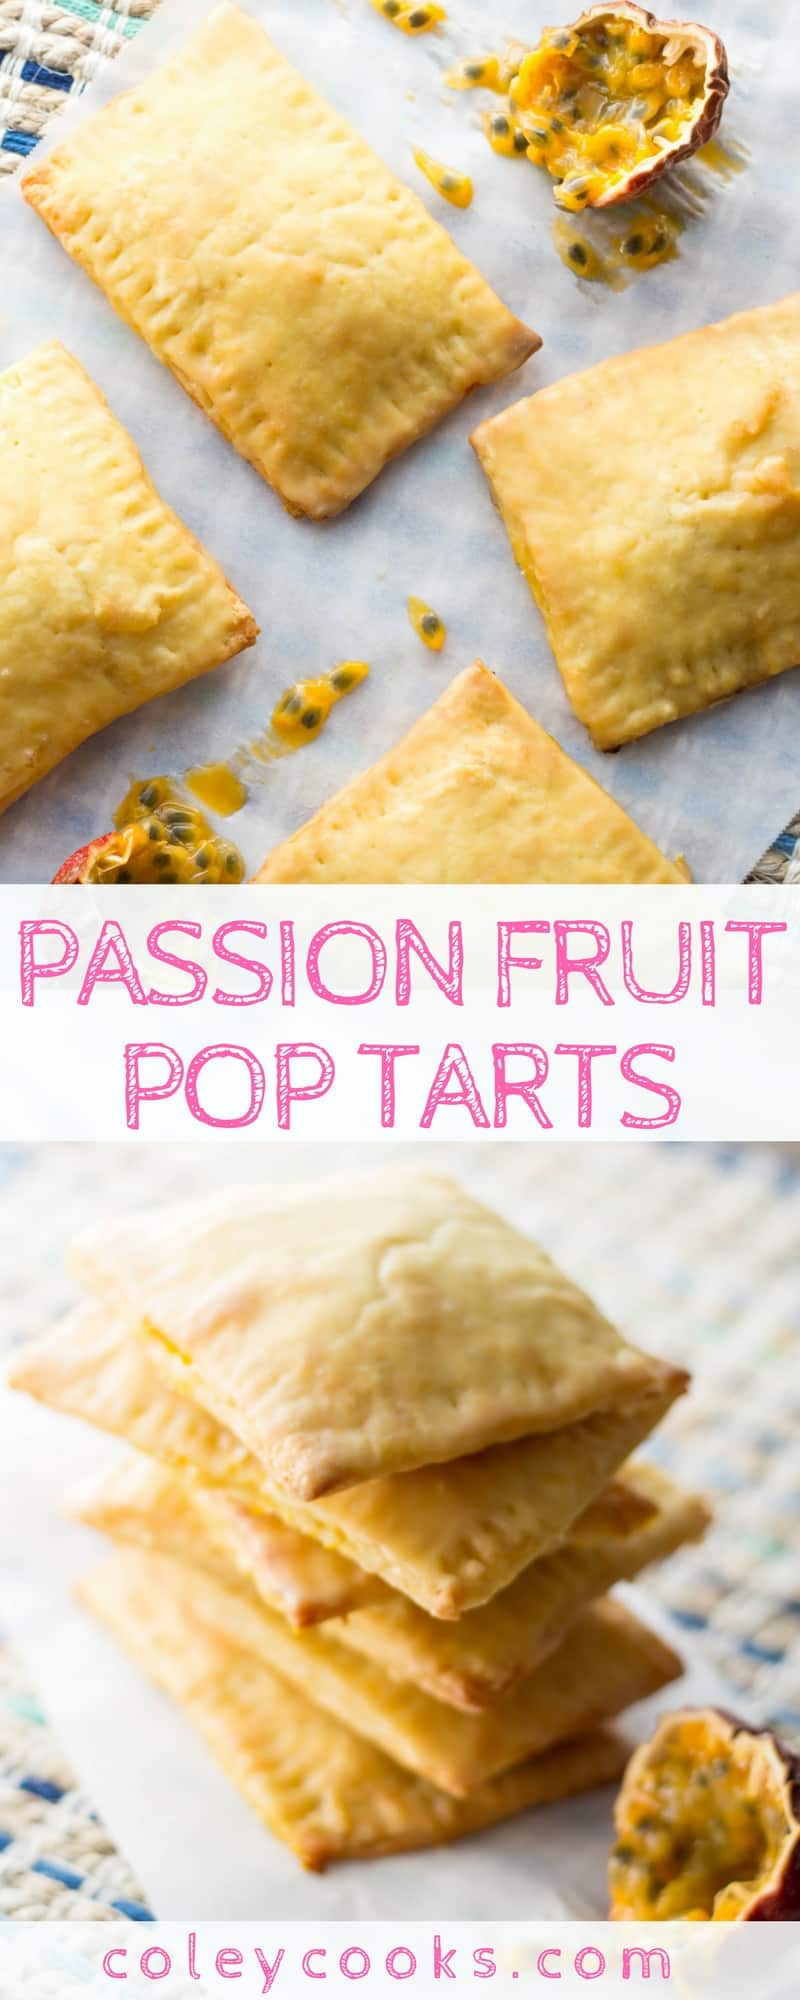 PASSIONFRUIT POP TARTS | Flaky pastries filled with tangy passionfruit curd. This quirky tropical pastry makes an unexpected addition to brunch or makes a fun dessert! | ColeyCooks.com